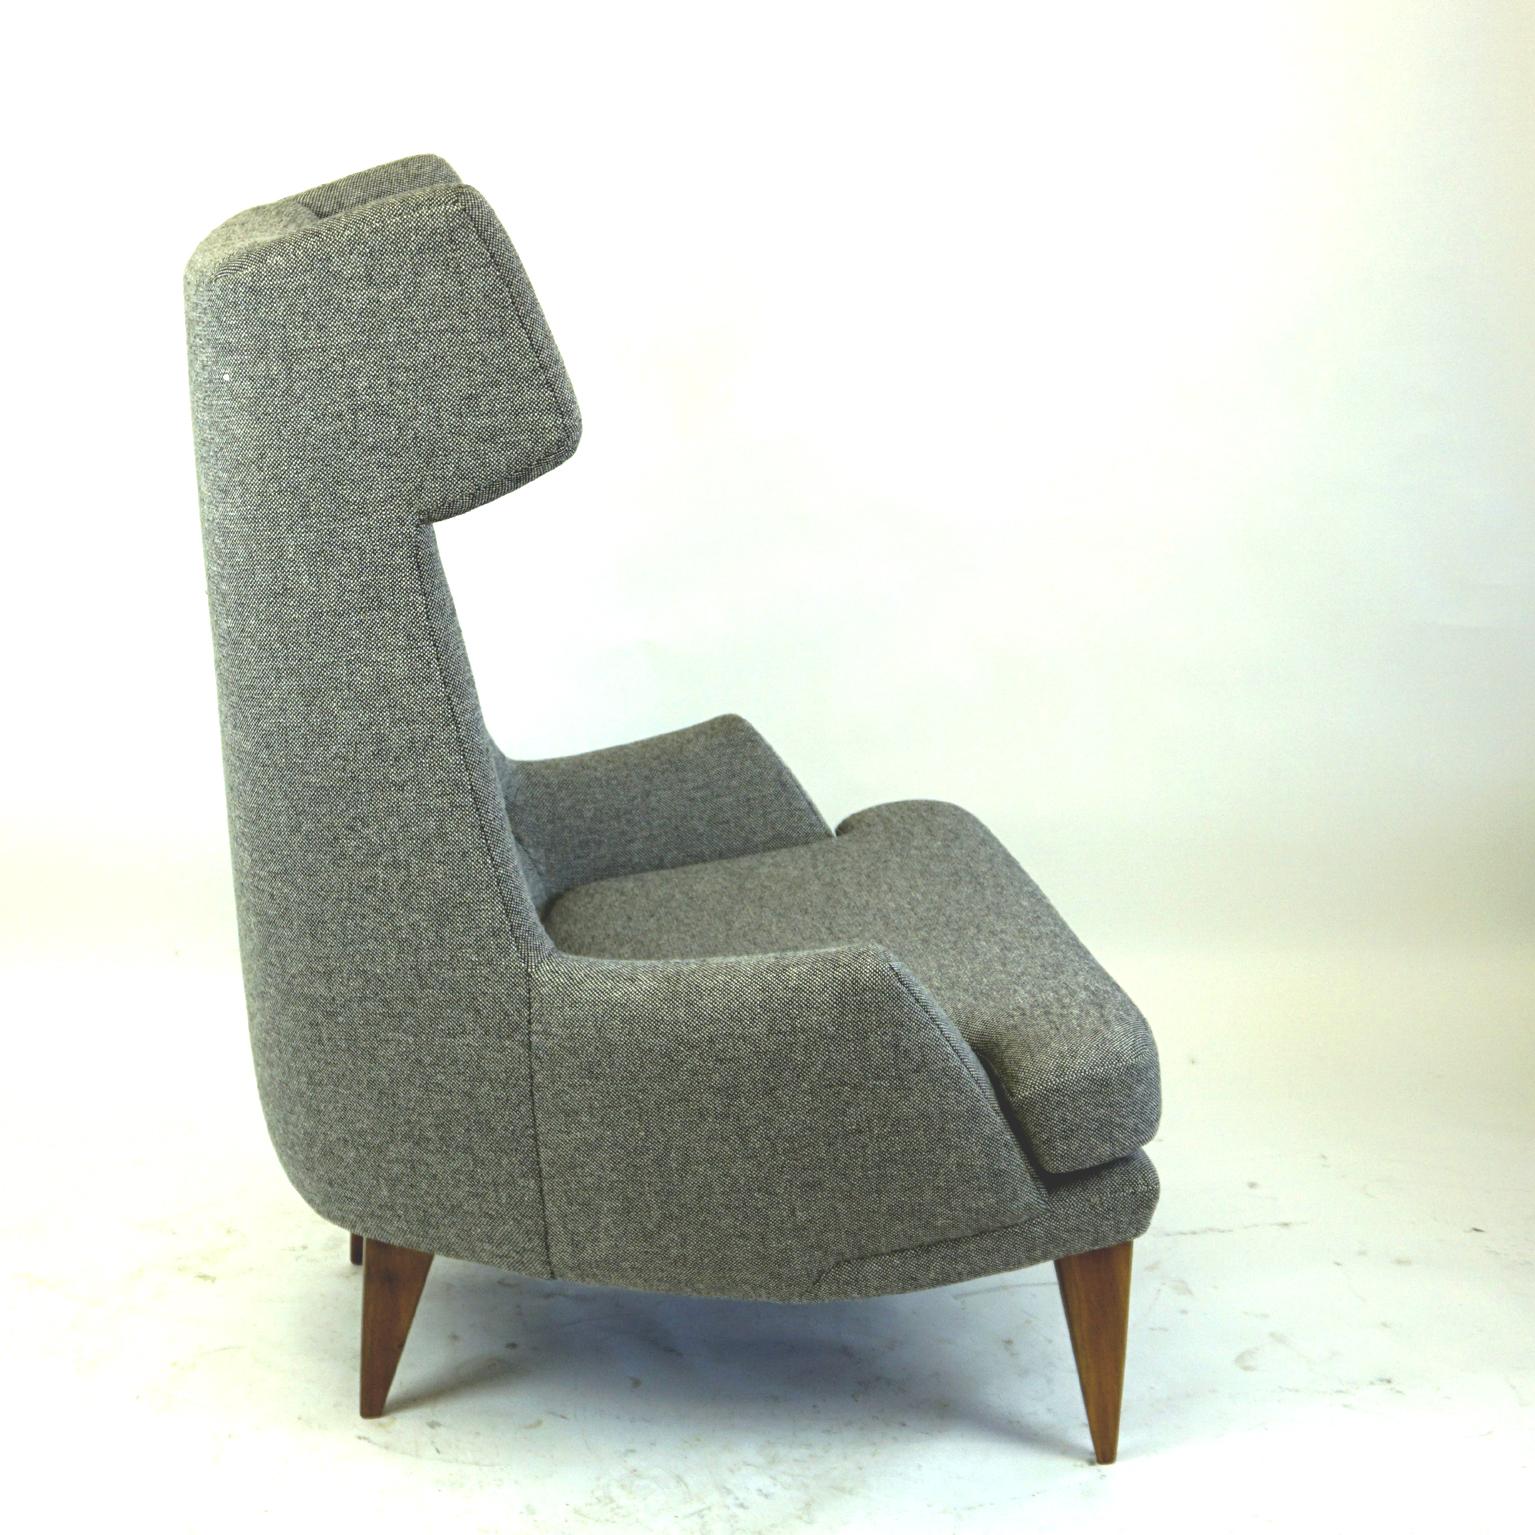 Amazing extra large and highly comfortable Austrian Midcentury Lounge Chair designed by one of the the most important Austrian Post War Architects Oswald Haerdtl, who studied and worked together with Josef Hoffmann. 
The Chair features a Wooden